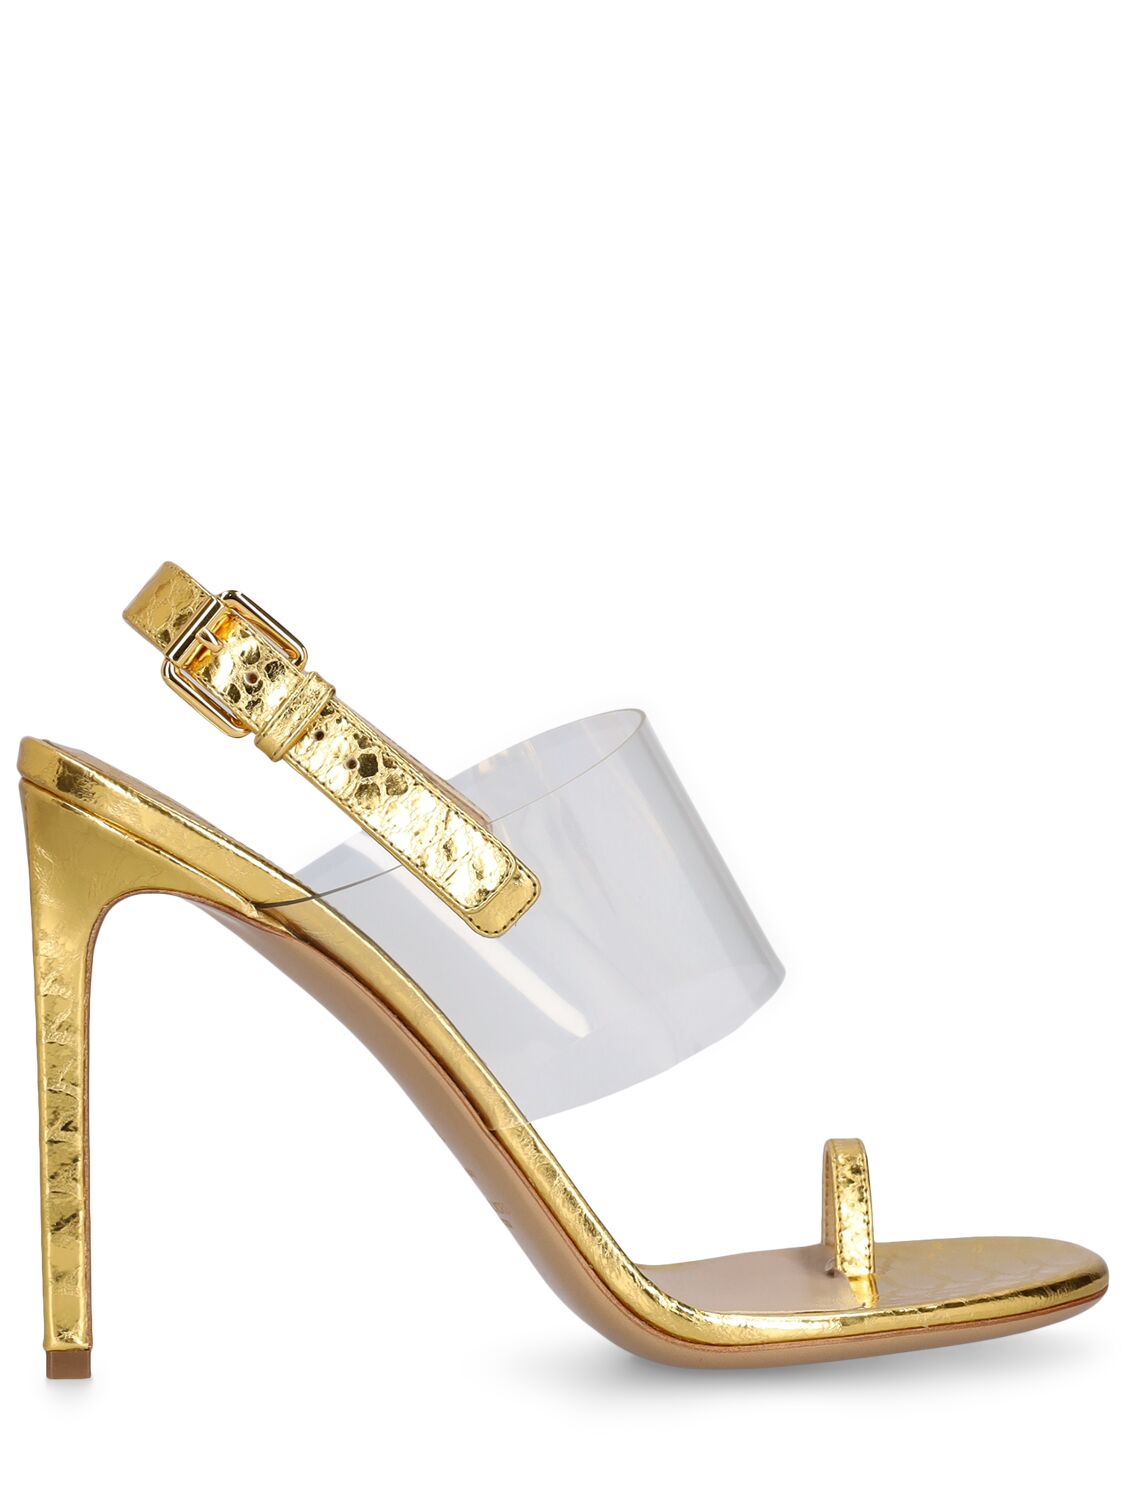 Michael Kors 110mm Catherine Python Print Sandals In Gold